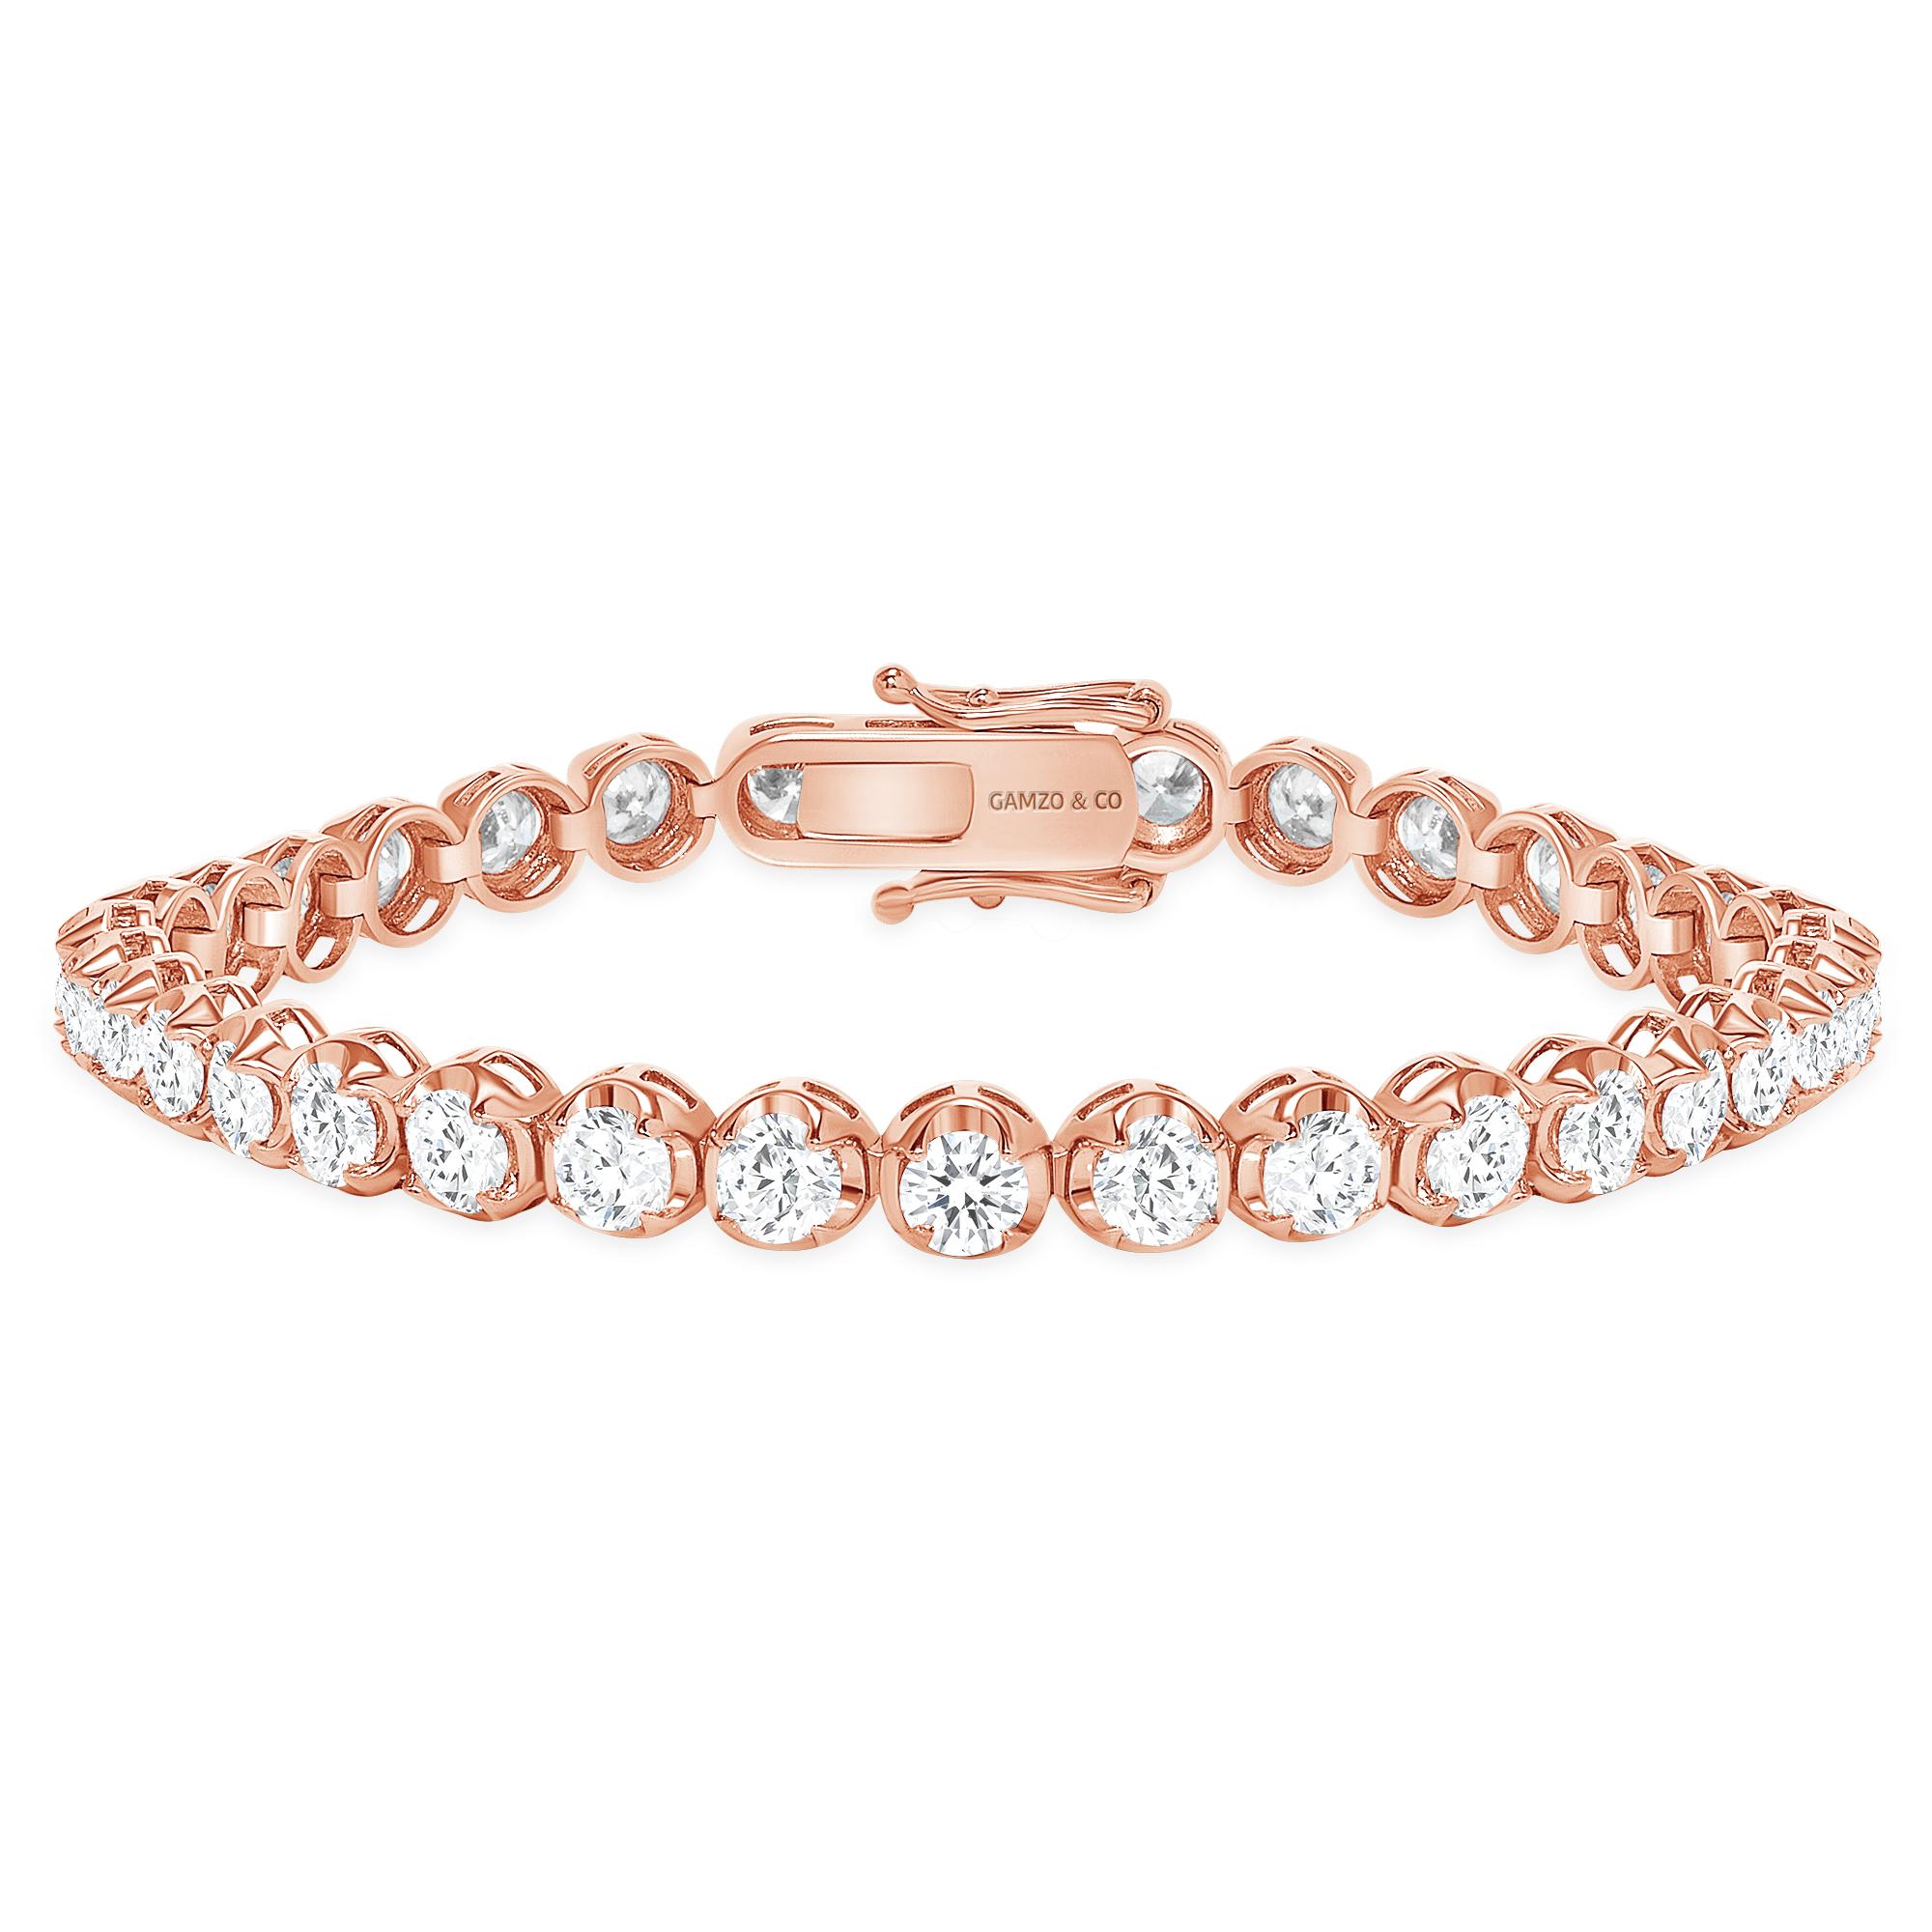 These beautiful round diamonds dance around your wrist as they absorb light and attention.
Metal: 14k Gold
Diamond Cut: Round
Diamond Total Carats: 5ct
Diamond Clarity: VS
Diamond Color: F
Color: Rose Gold
Bracelet Length: 5.5 Inches 
Included with